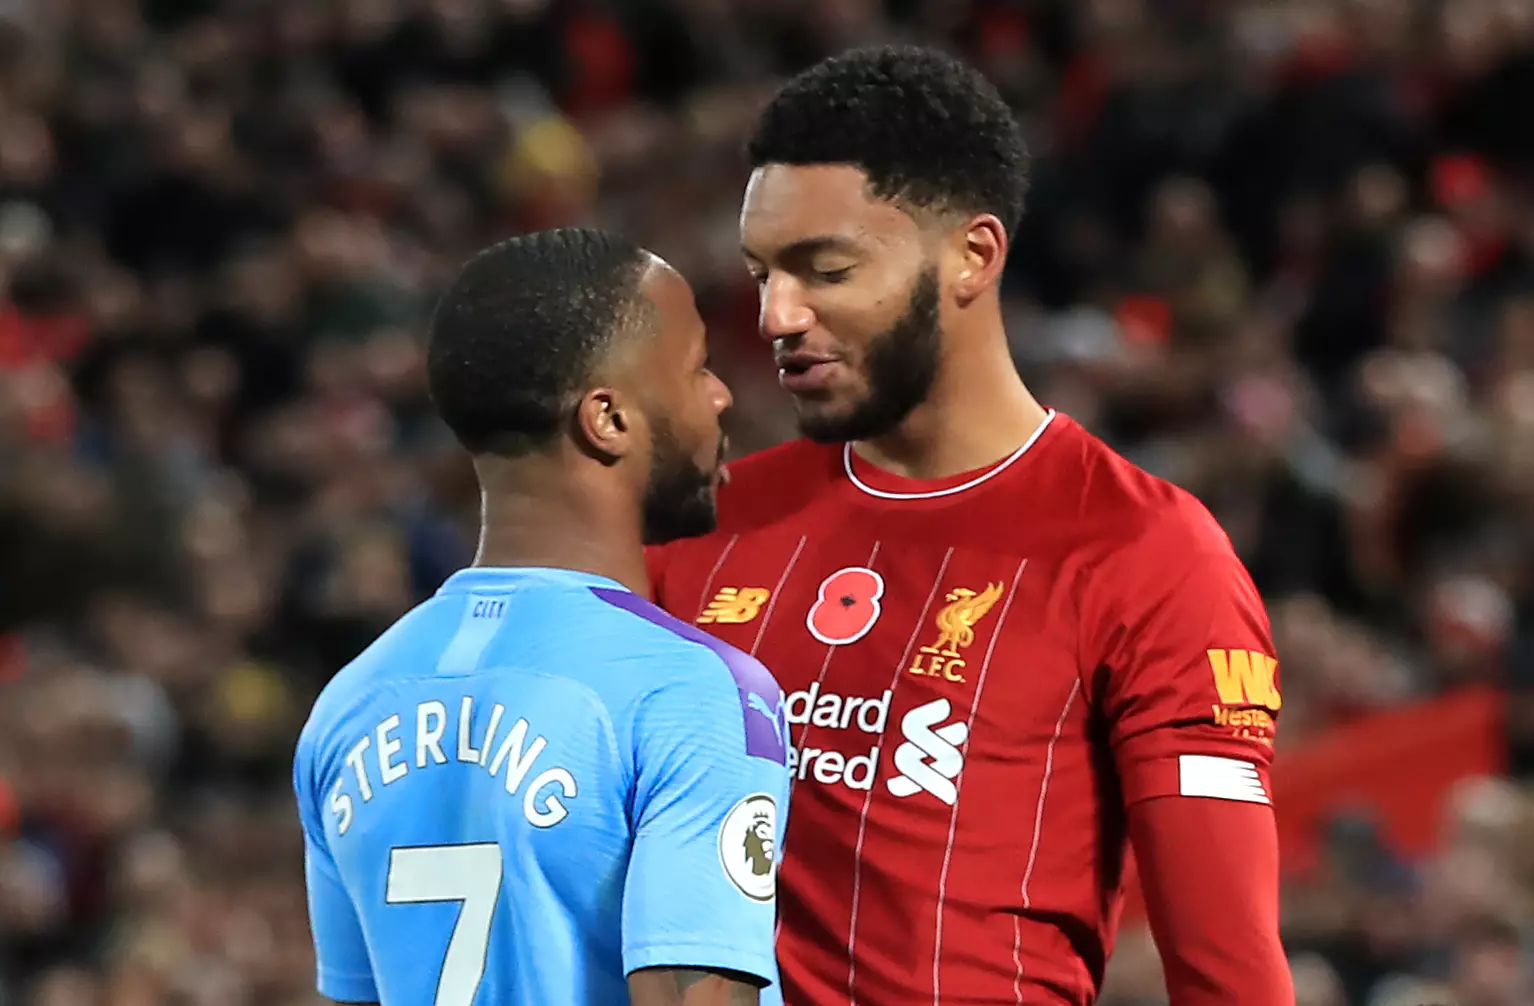 Raheem Sterling and Joe Gomez clashed during Liverpool's clash with Man City and it boiled over to the next day on England duty